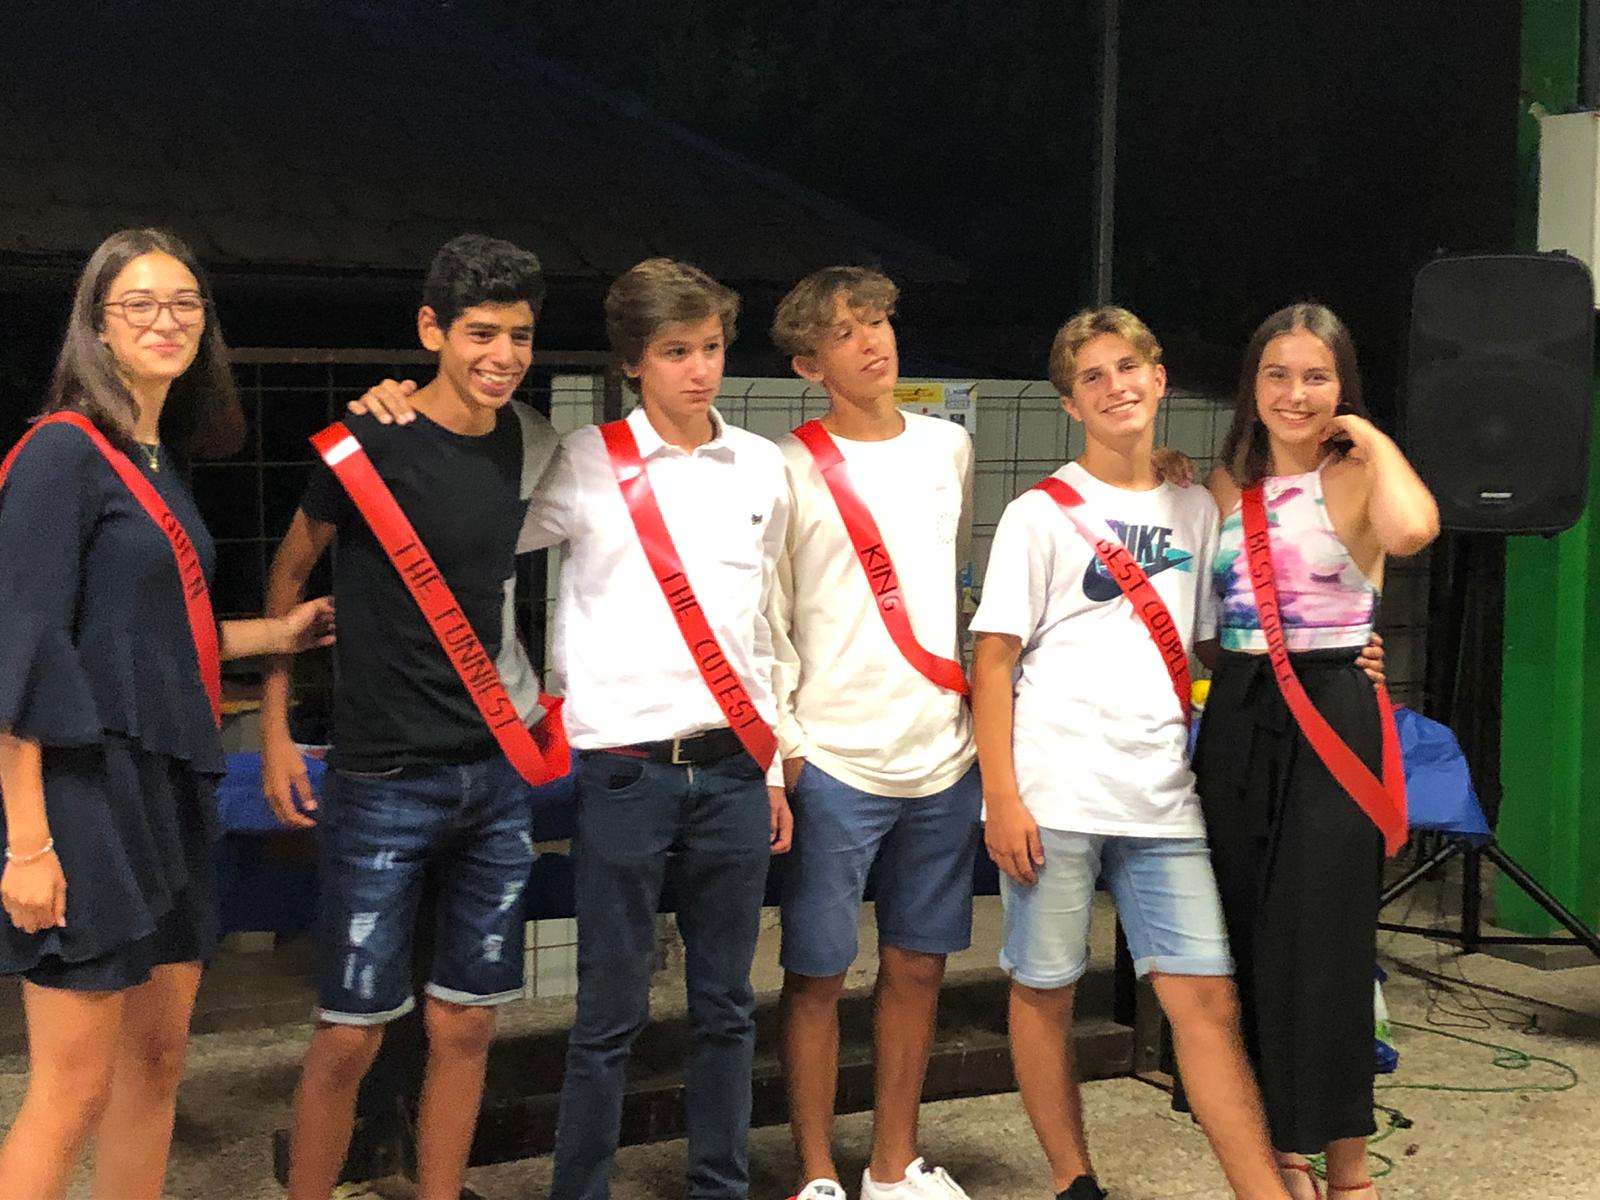 A mountain of fun in Valtellina Image 2019-07-06 at 13.52.52